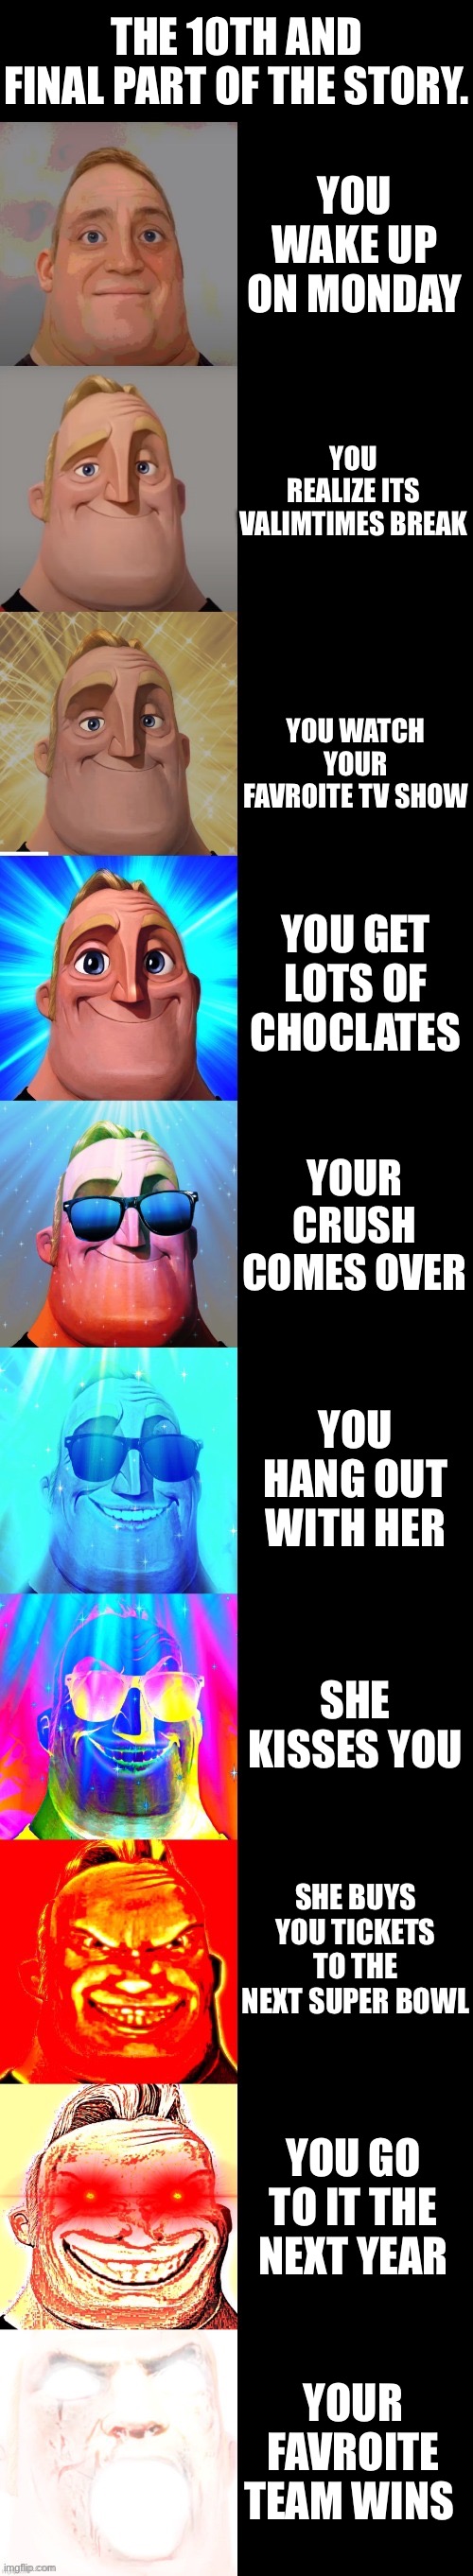 Babe wake up, new Mr. Incredible meme format just dropped - iFunny